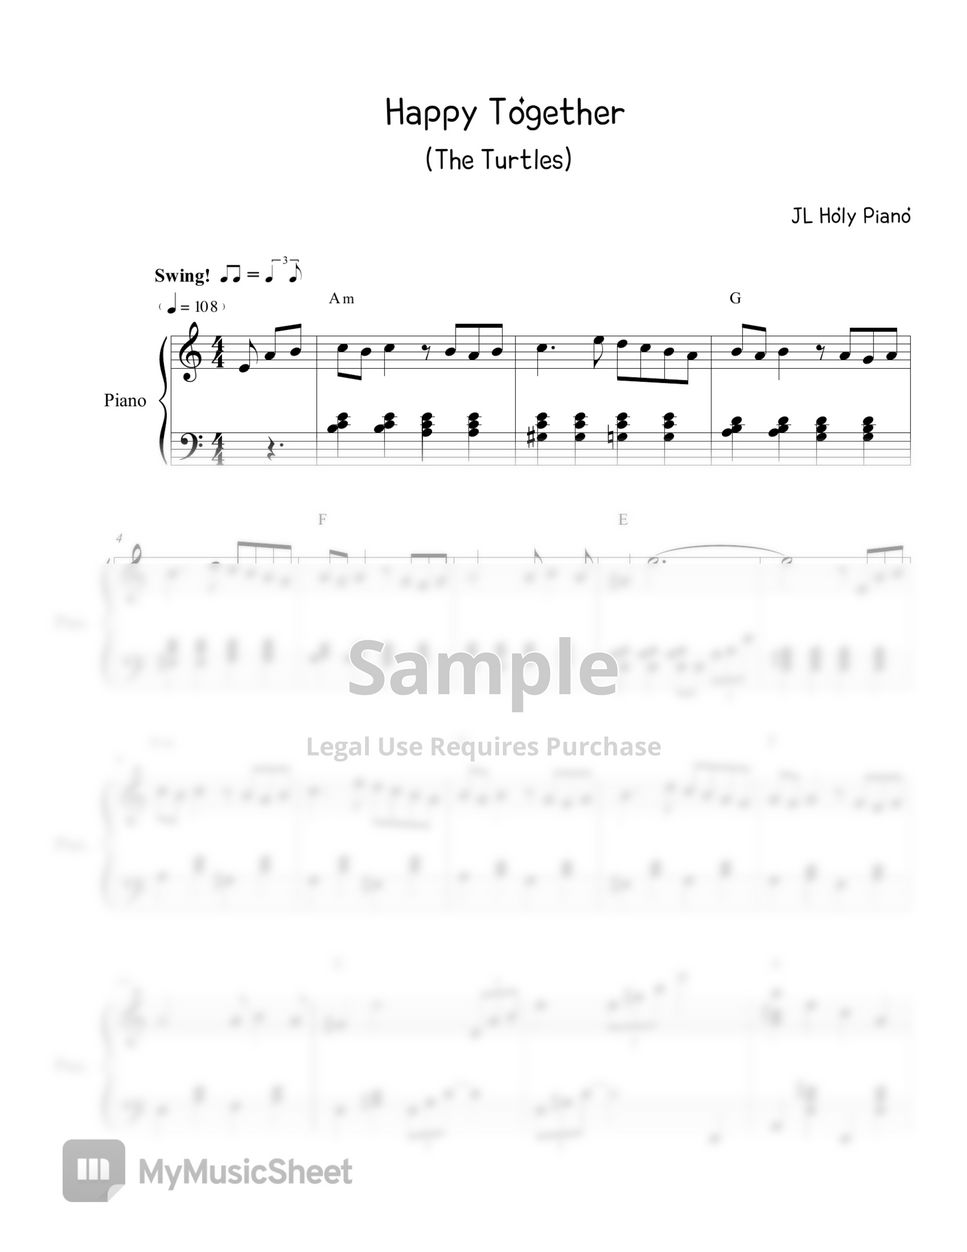 The Turtles - Happy Together by JL Holy Piano